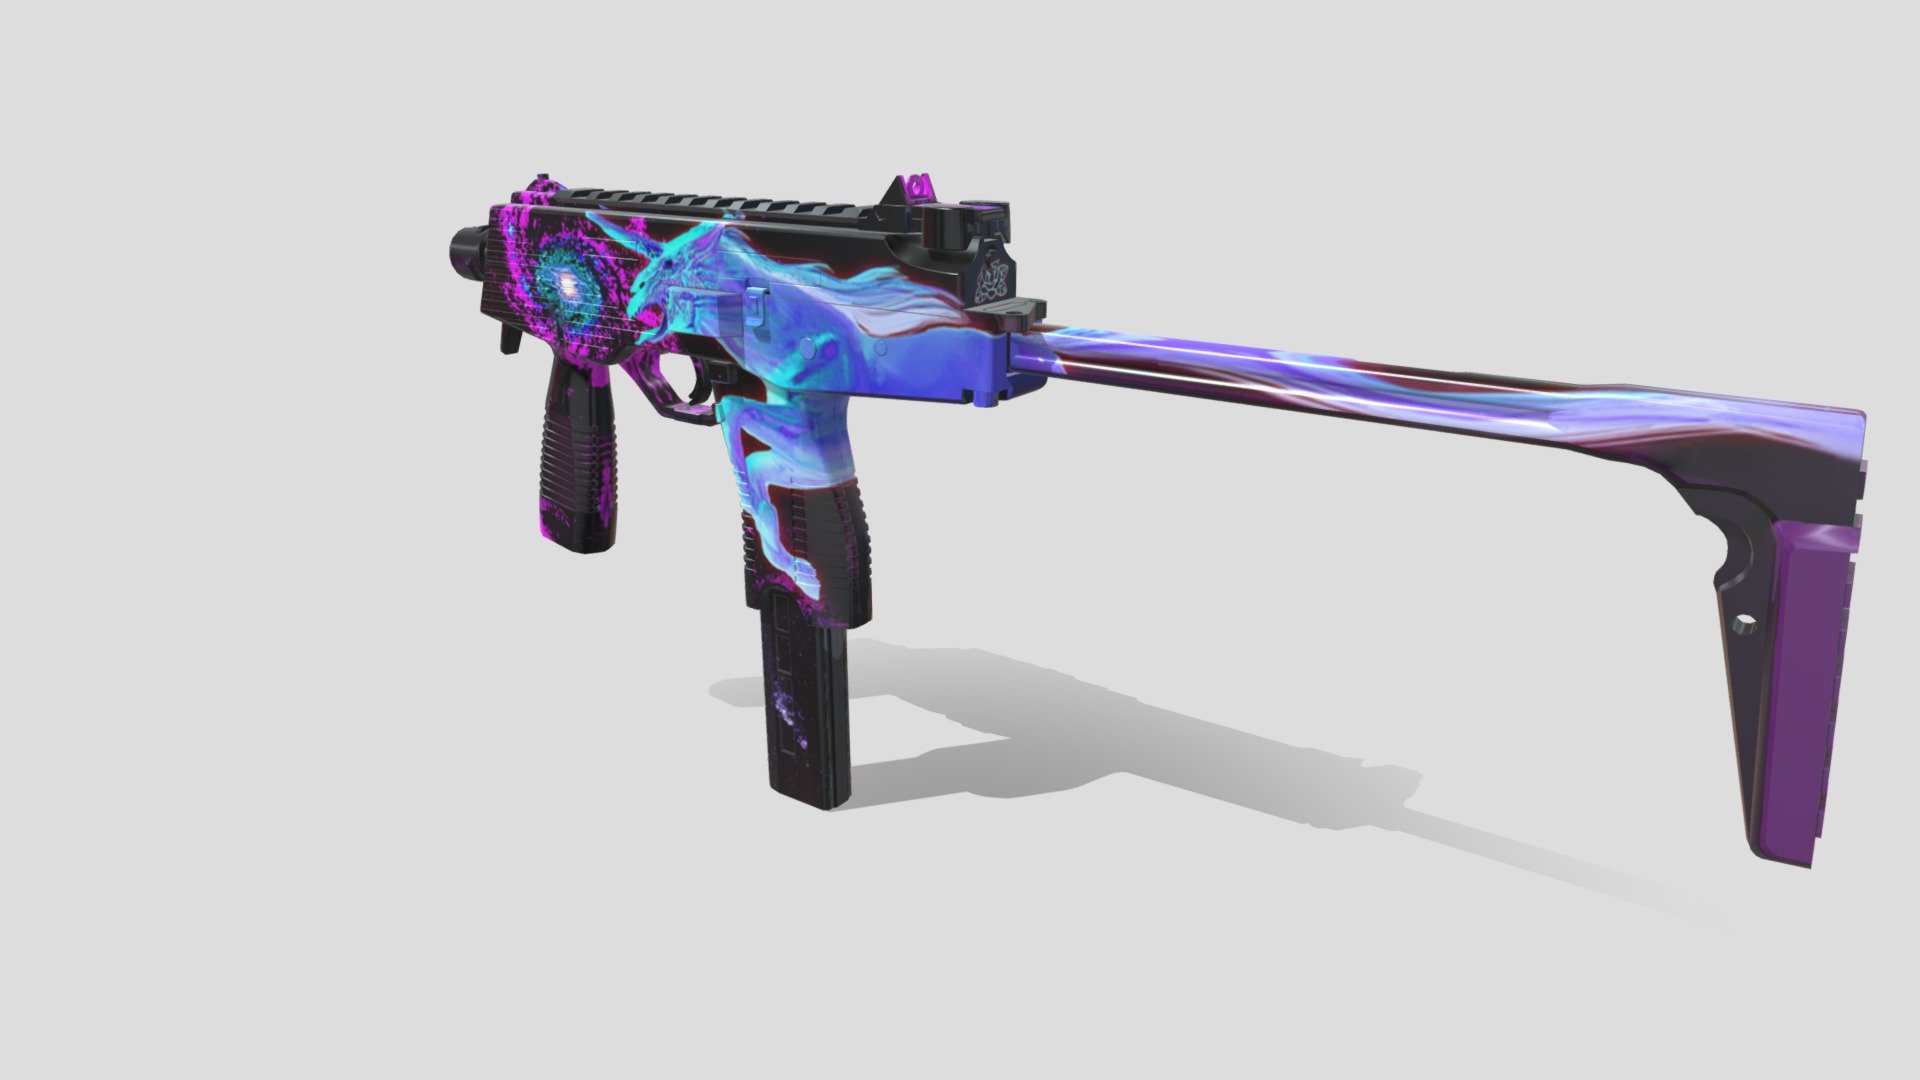 this is a mp9 gun design for the CS GO Dreams &amp; Nightmares contest

see this skin on CS GO workshop and please consider liking and voting. maybe you see this in the game someday.
https://steamcommunity.com/sharedfiles/filedetails/?id=2633528918

you can see the high quality pictures on my art station
https://www.artstation.com/artwork/6badKw - MP9 BLACKROSE_Dreams & Nightmares CS GO Contest - 3D model by Negin (@blackroses) 3d model